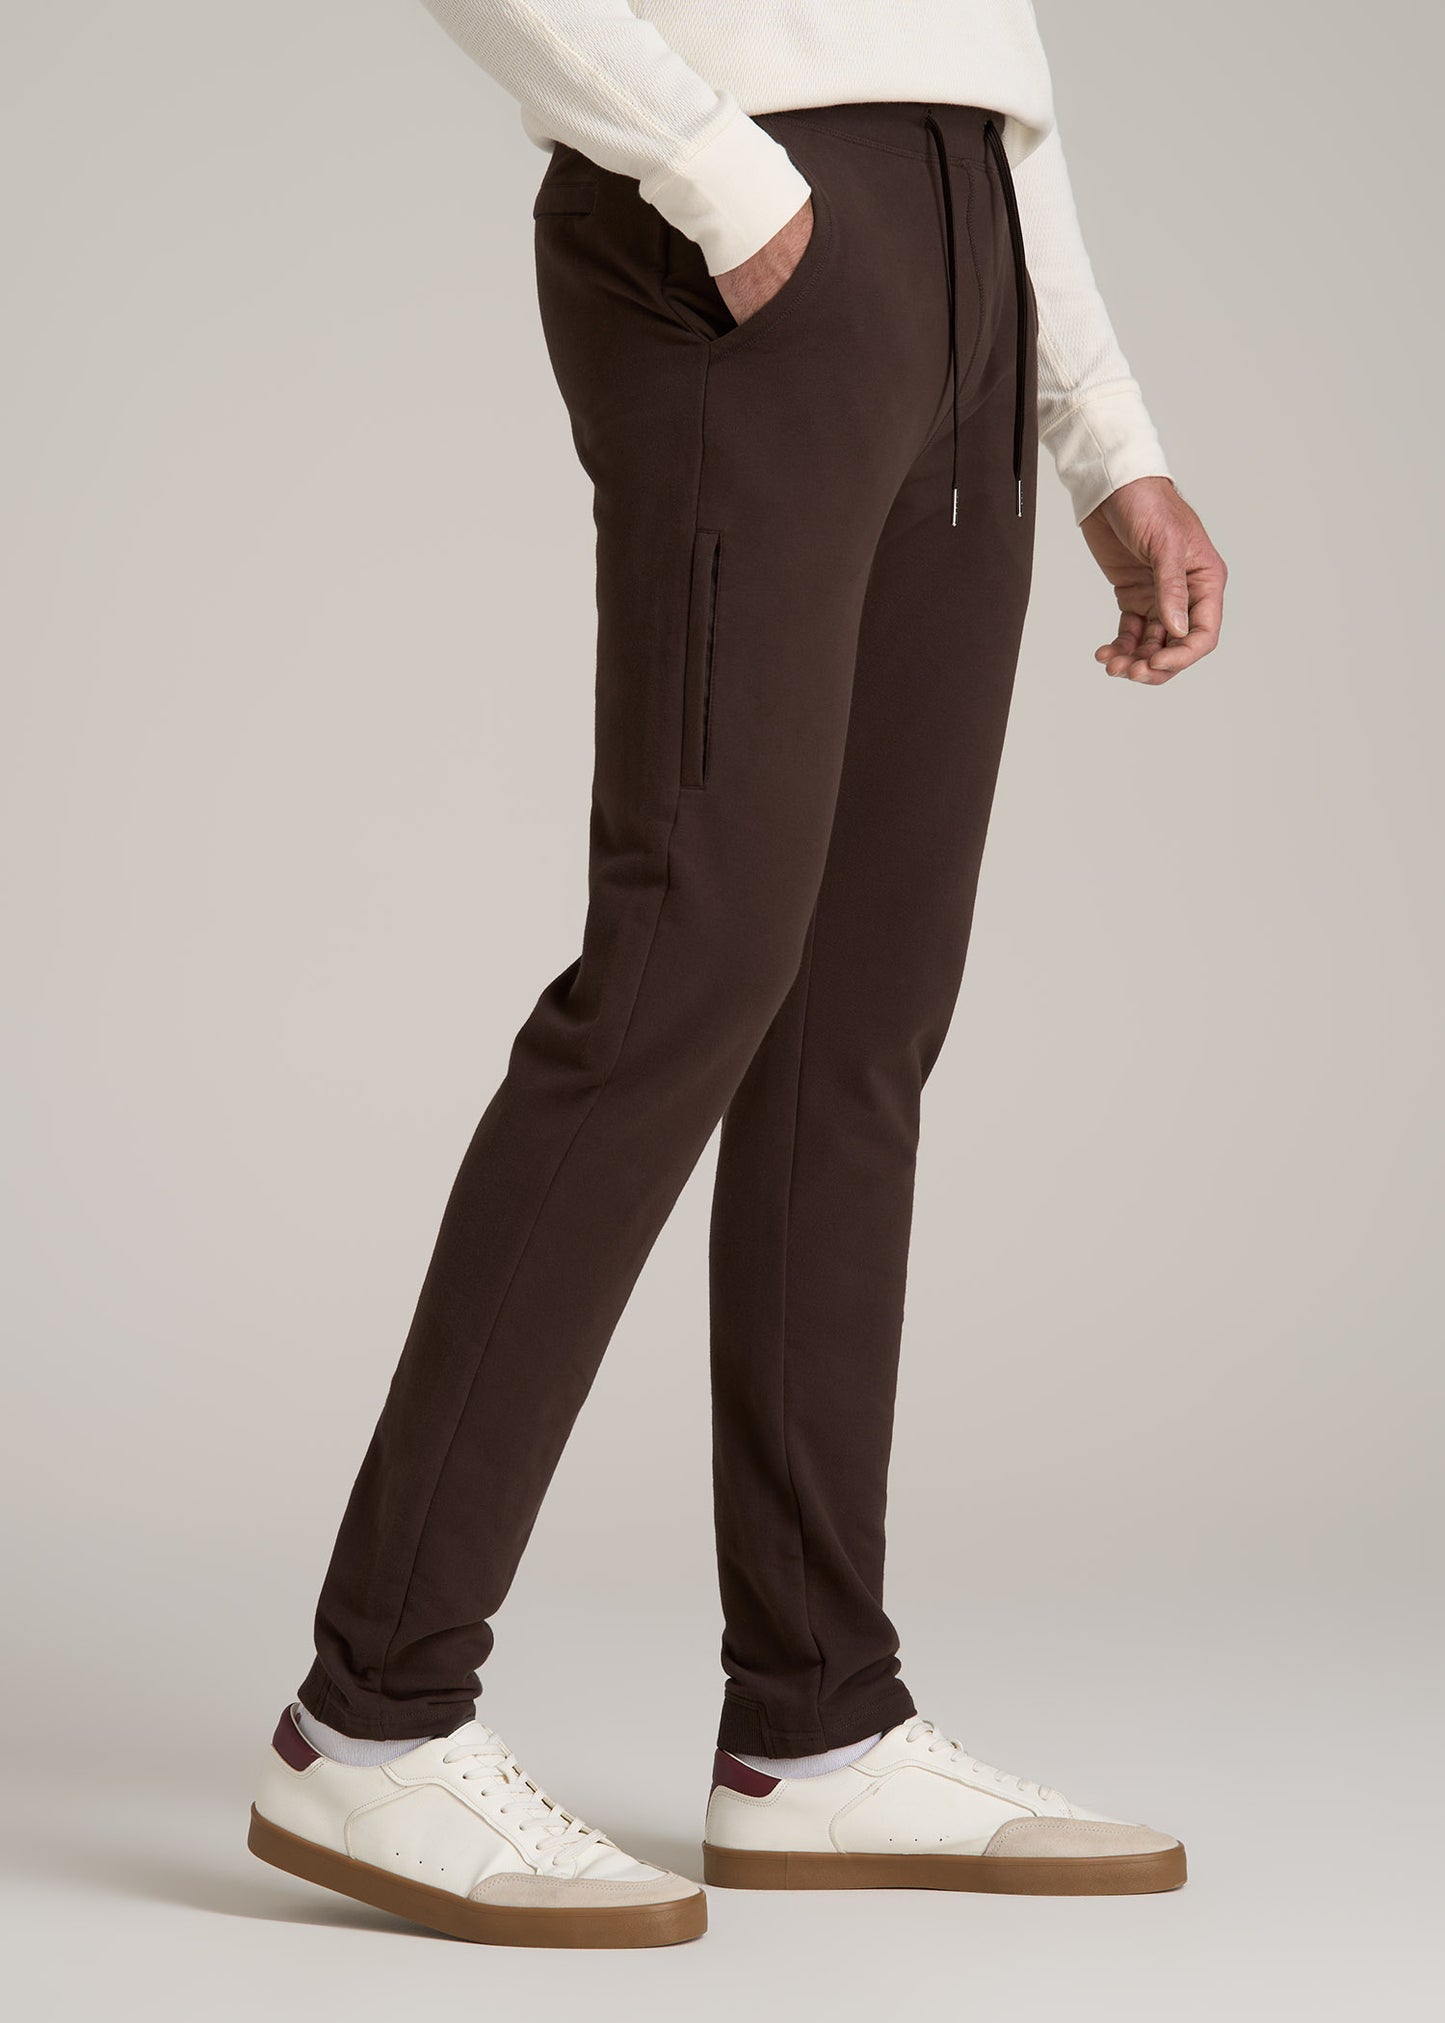 Microsanded French Terry Sweatpants for Tall Men in Espresso